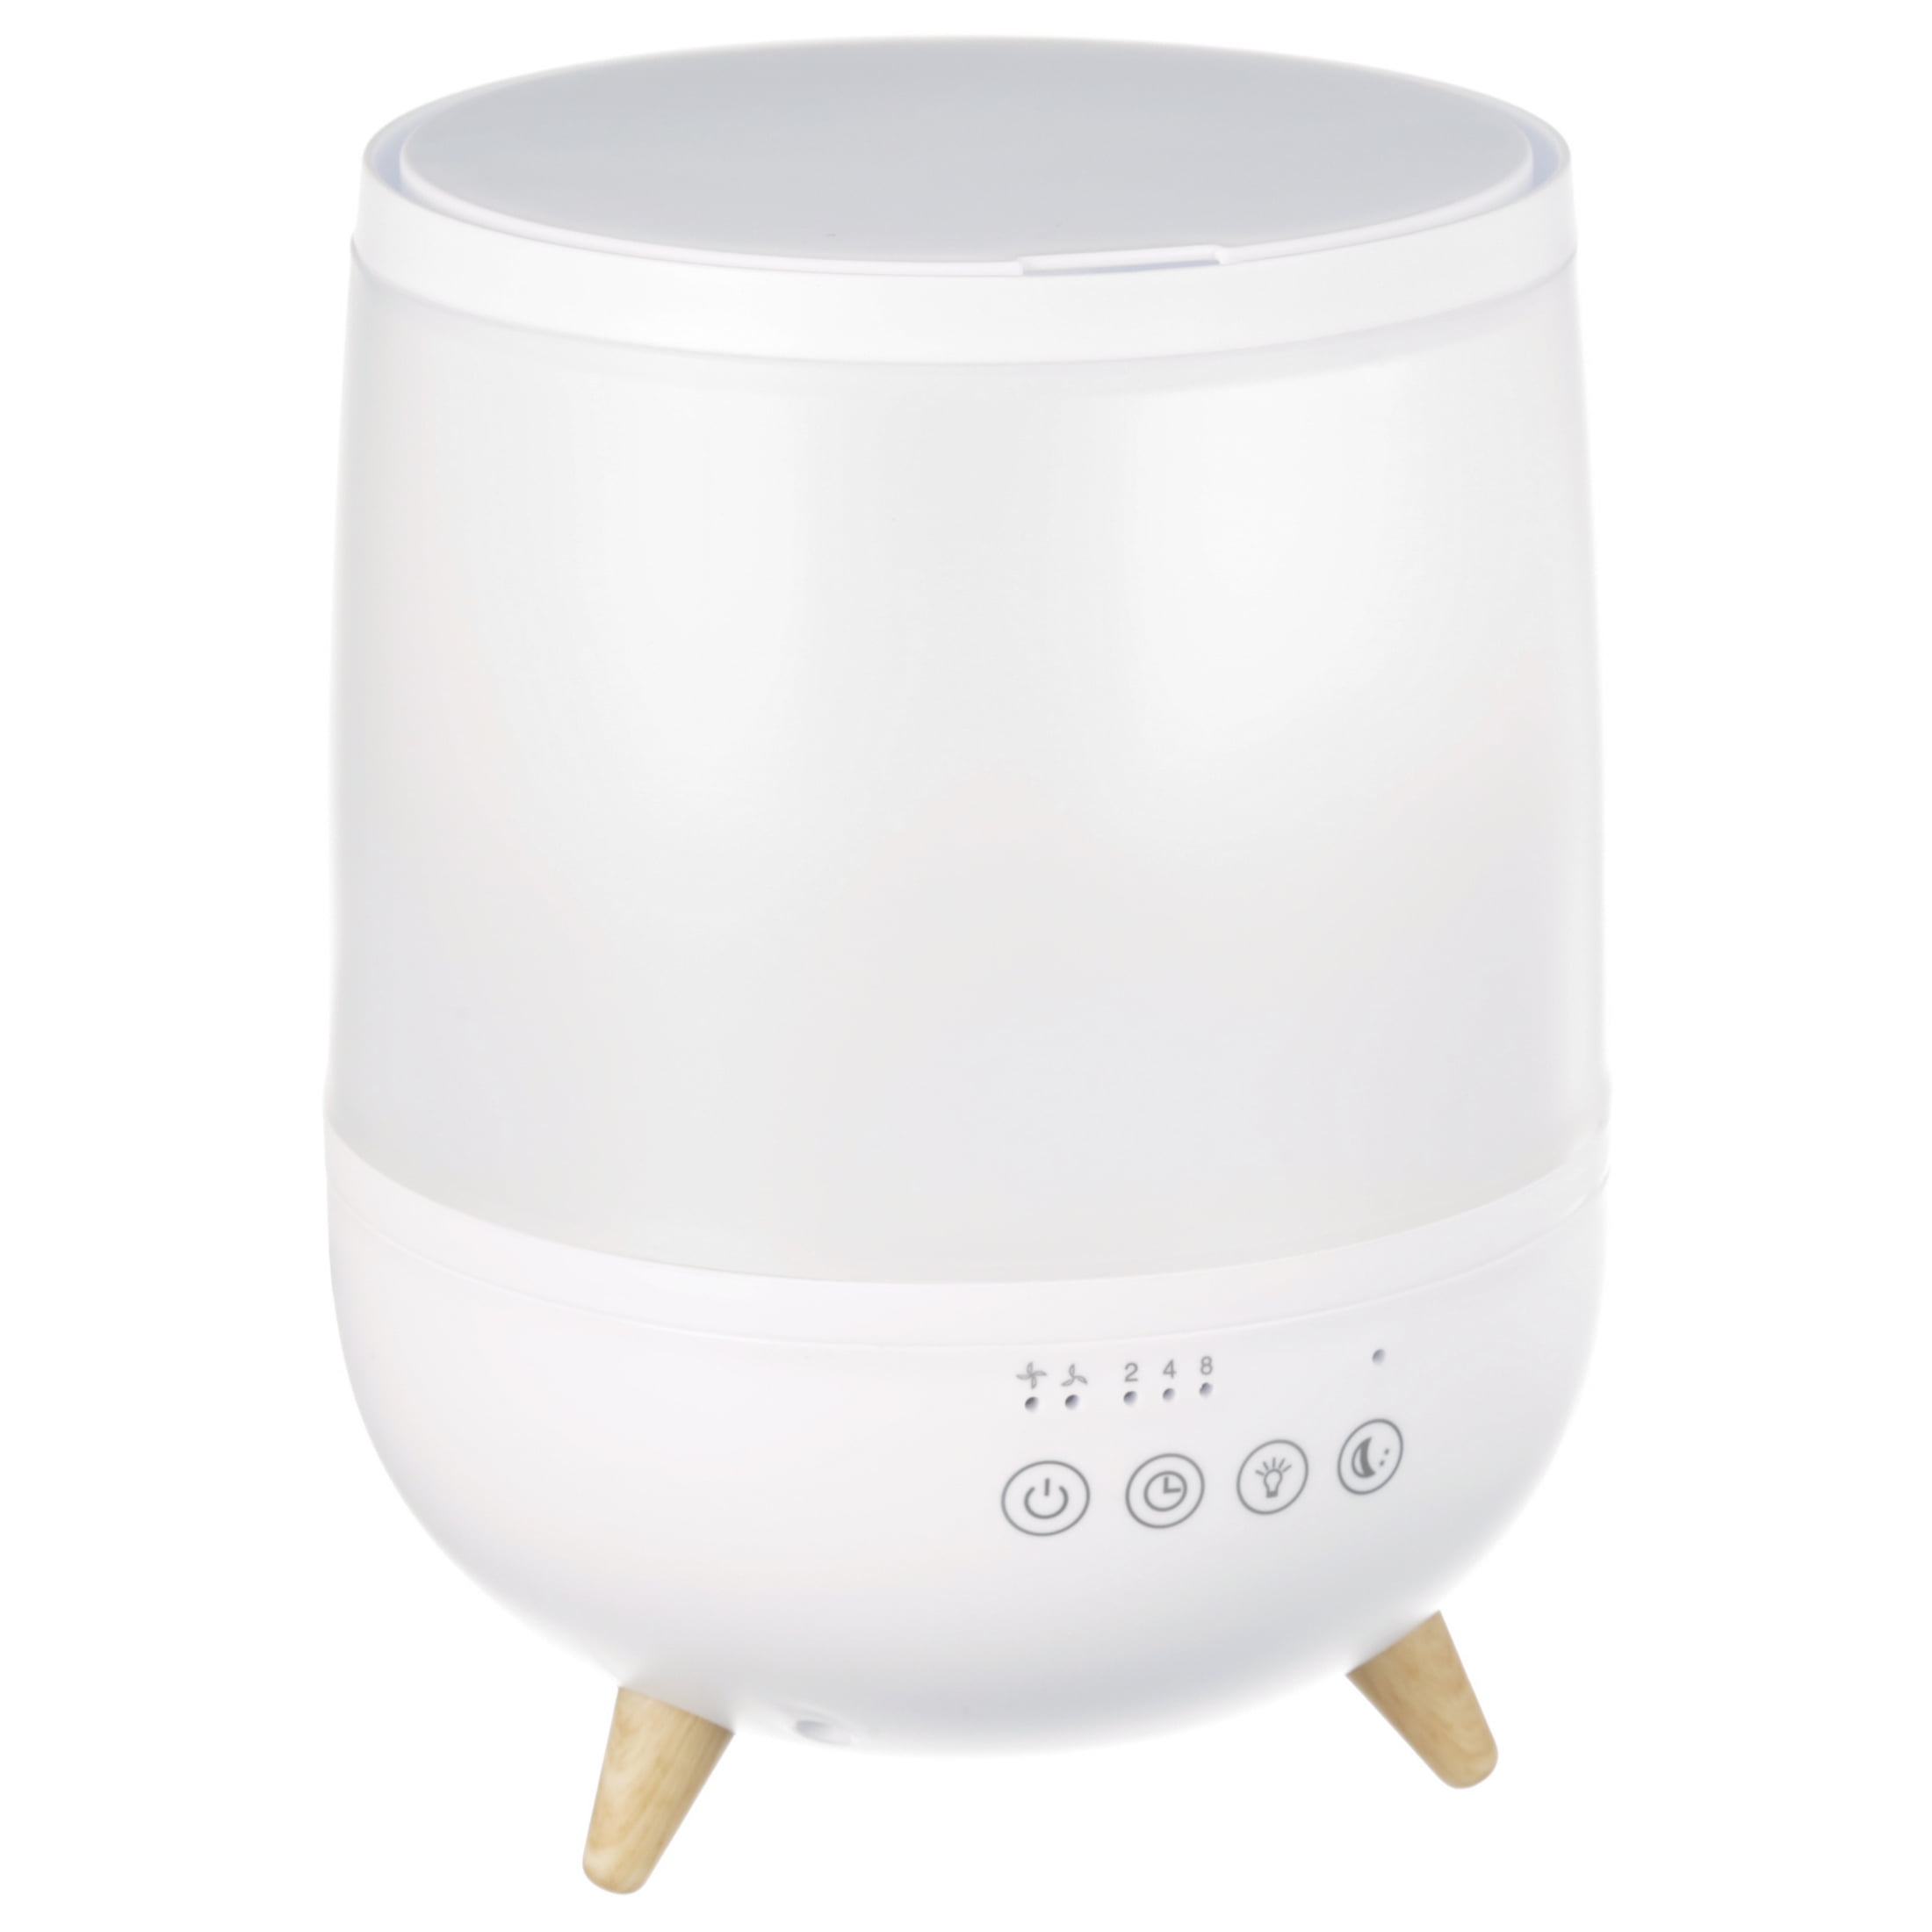 Equate Ultrasonic Humidifier, Diffuser, Cool Mist, Visible Mist, Filter-Free, 0.5 Gallon, White and wooden